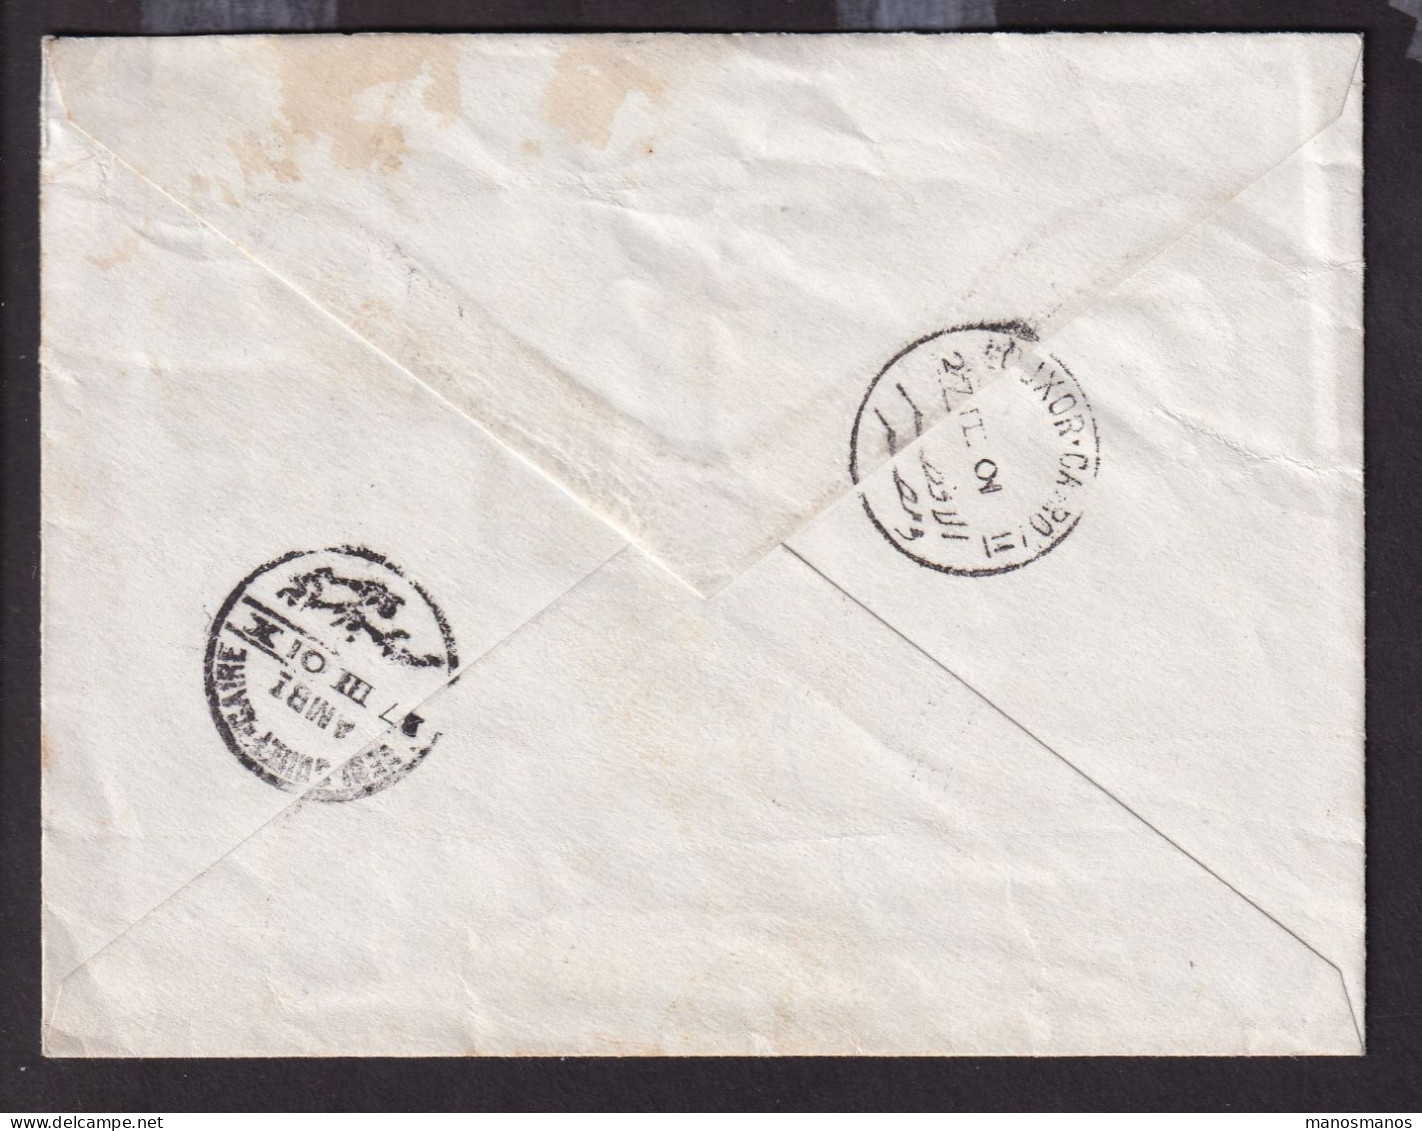 384/31 -- EGYPT LOUXOR-CAIRO TPO  - Stationary Envelope Cancelled 1901 To CAIRO -Backside BENI-SOUEF-CAIRE AMBt - 1866-1914 Khedivate Of Egypt